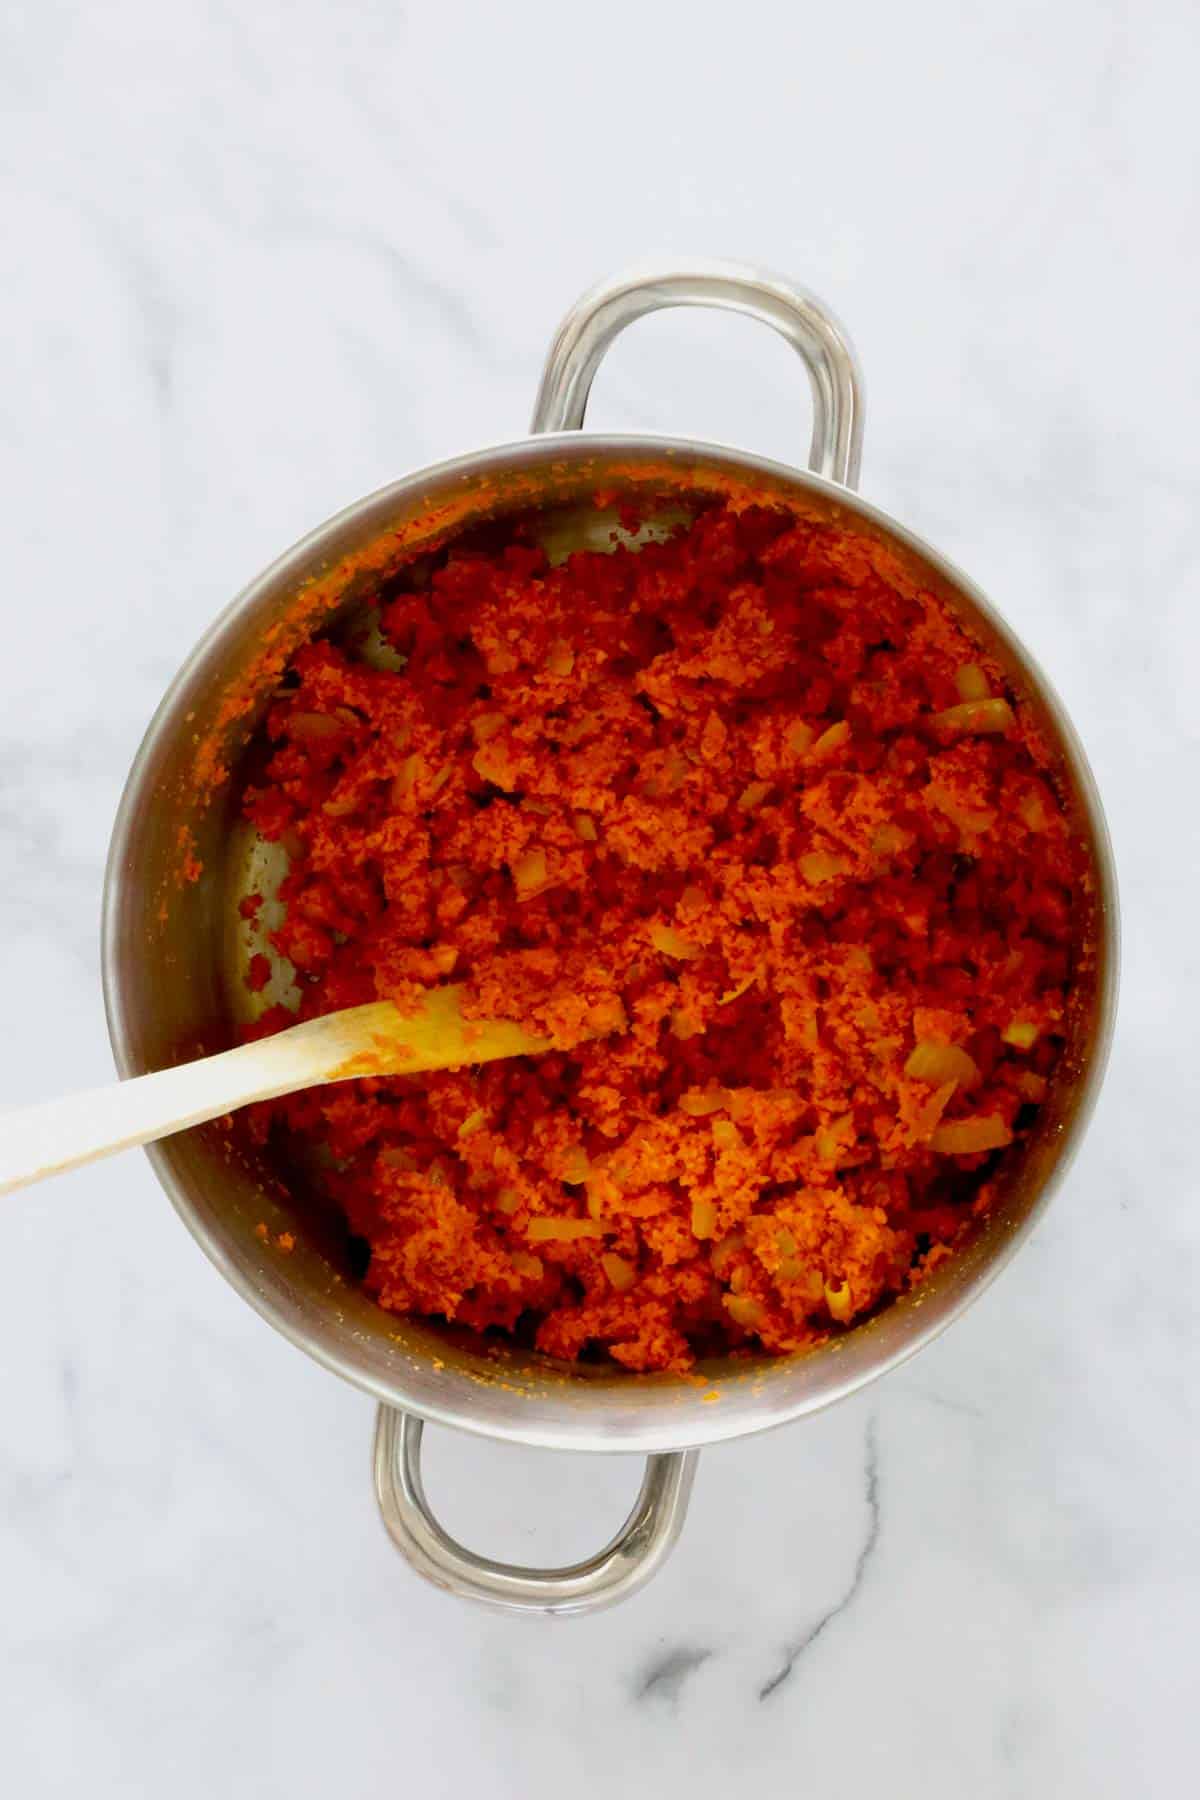 Grated carrot and tomato paste in a pot.